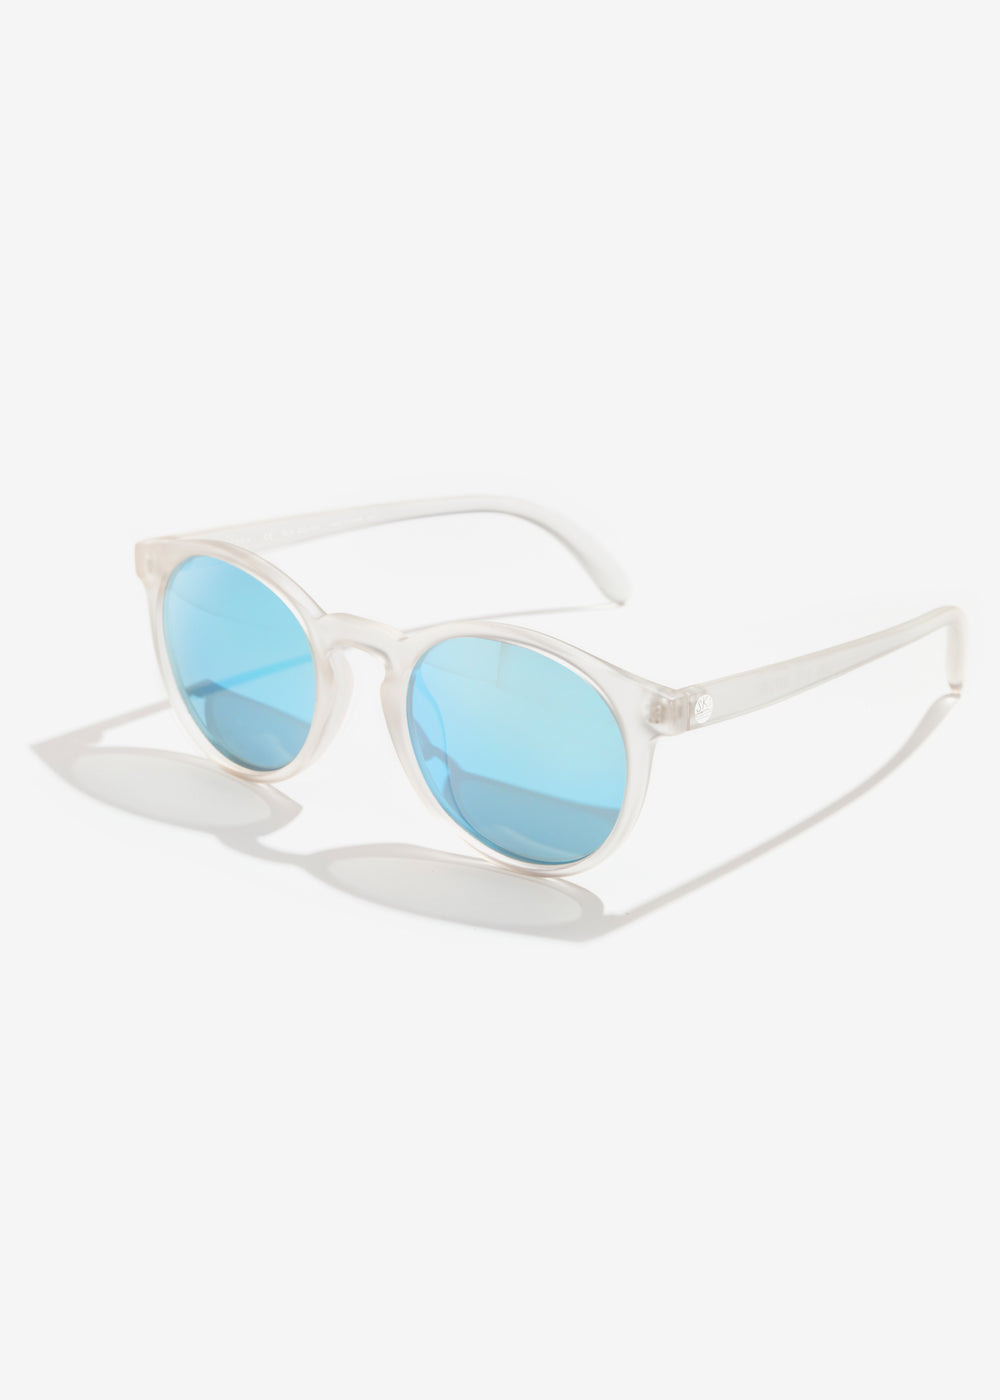 Dipsea Sunglasses in Frosted Sky by Sunski